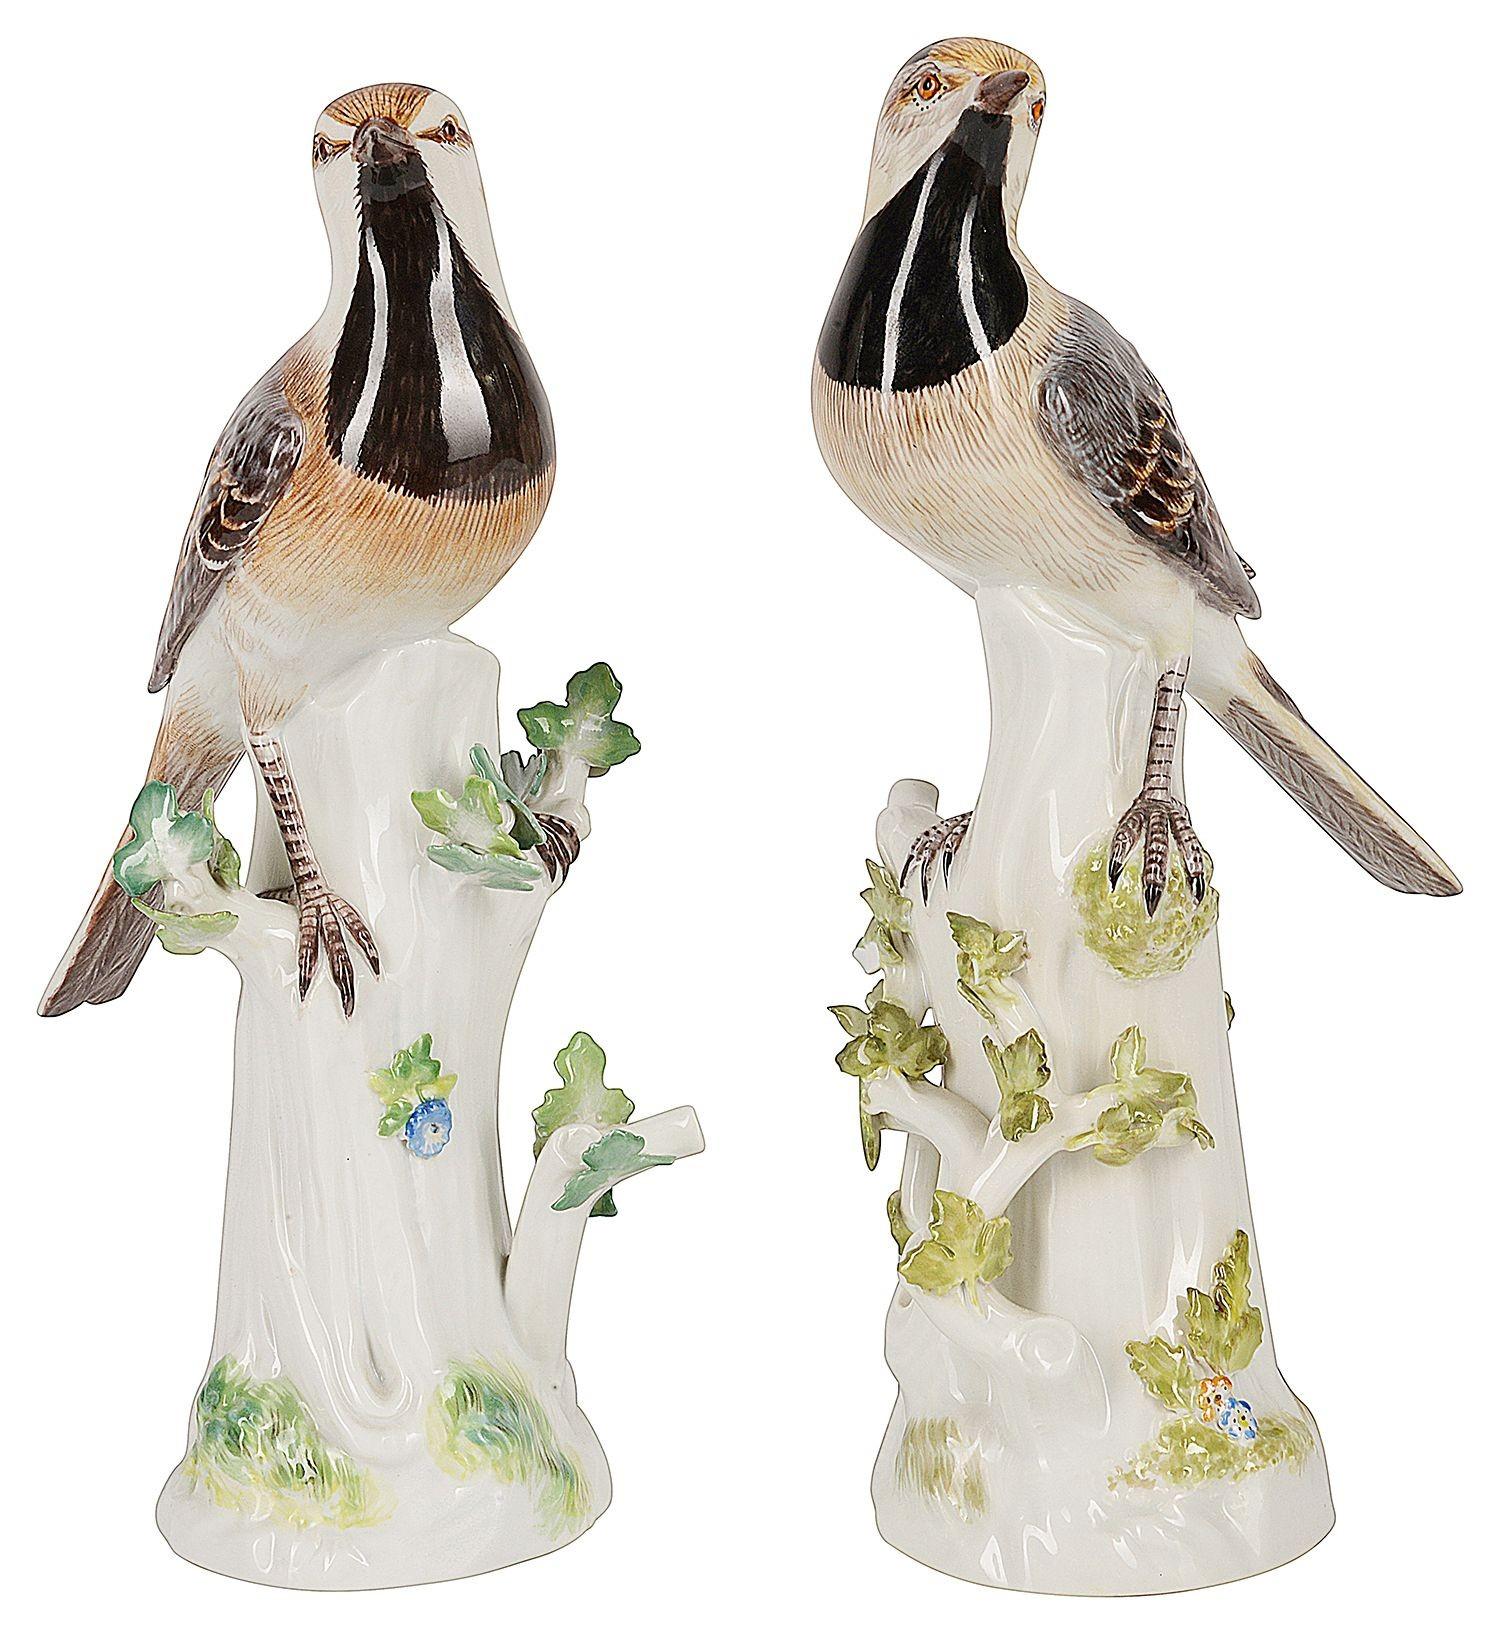 A very good quality pair of late 19th Century German Meissen Porcelain statues of White Wag tails perched on a tree stump.
Signed to the base of each with Blue crossed swords.